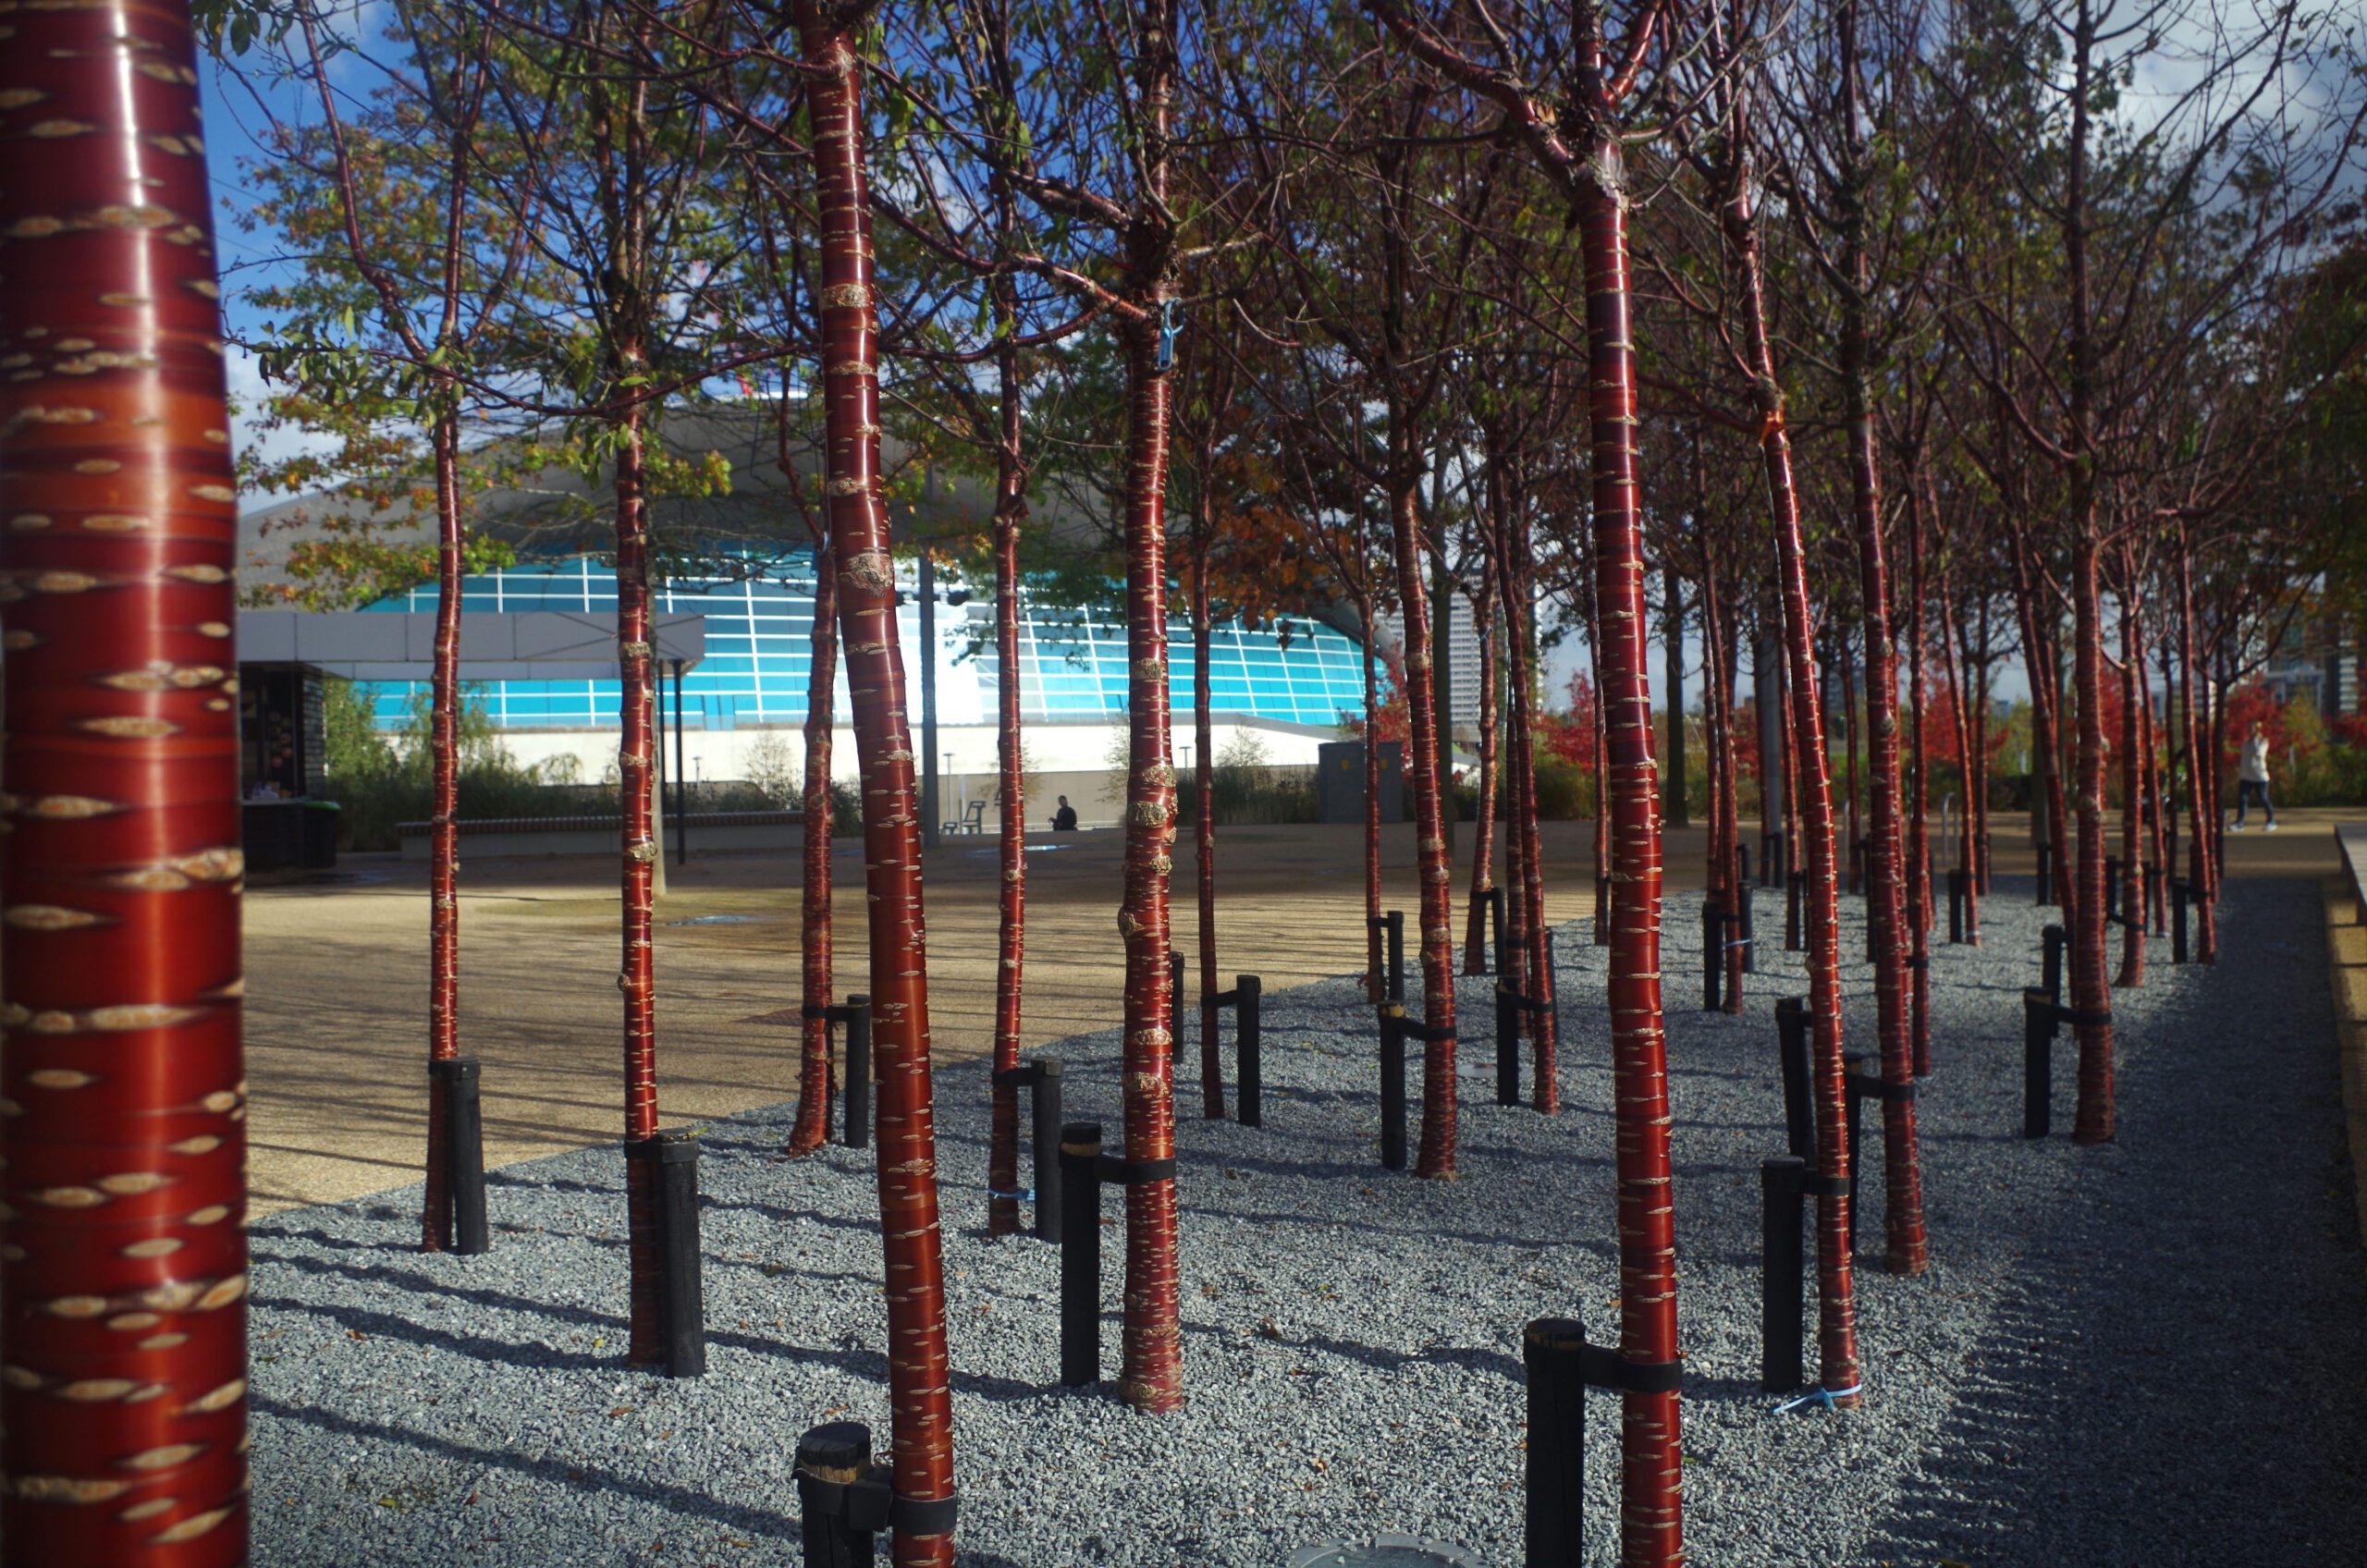 Prunus serrula trees planted in rows with red bark